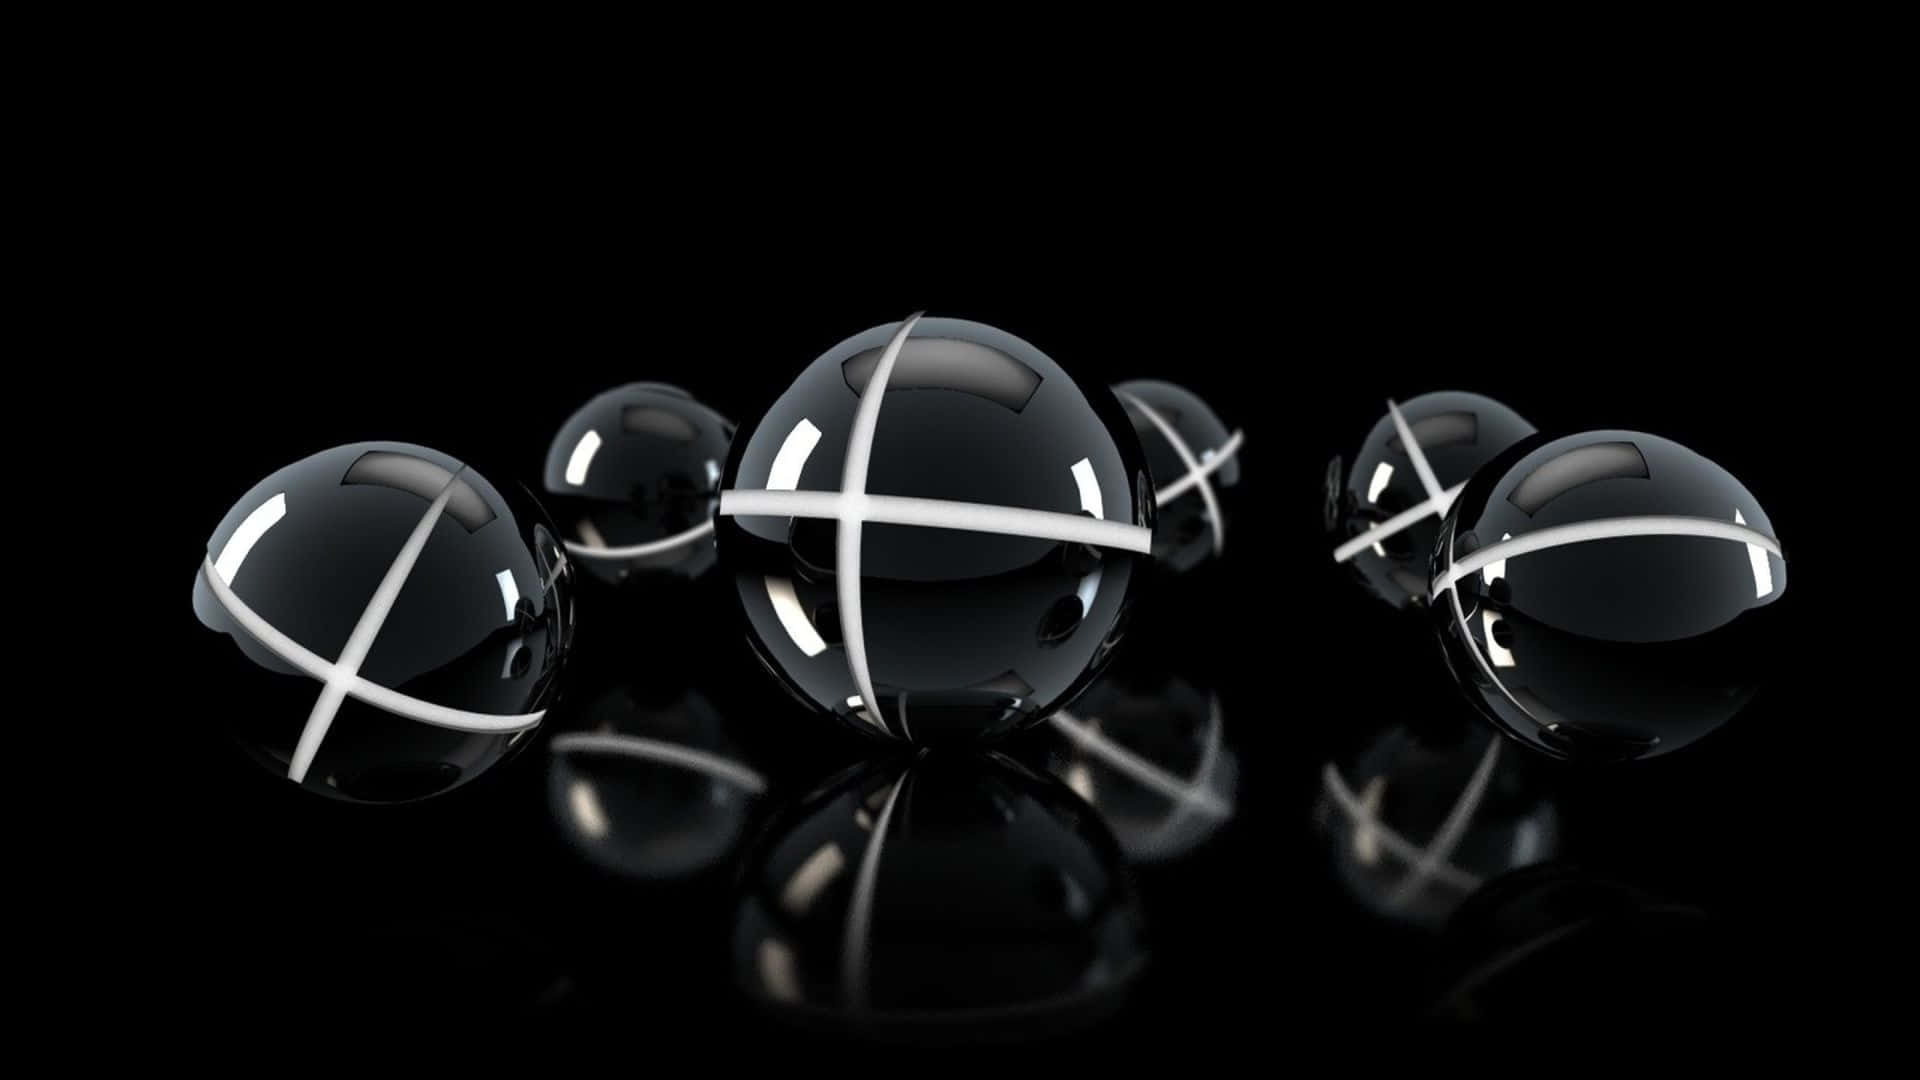 A Group Of Black And White Spheres On A Black Background